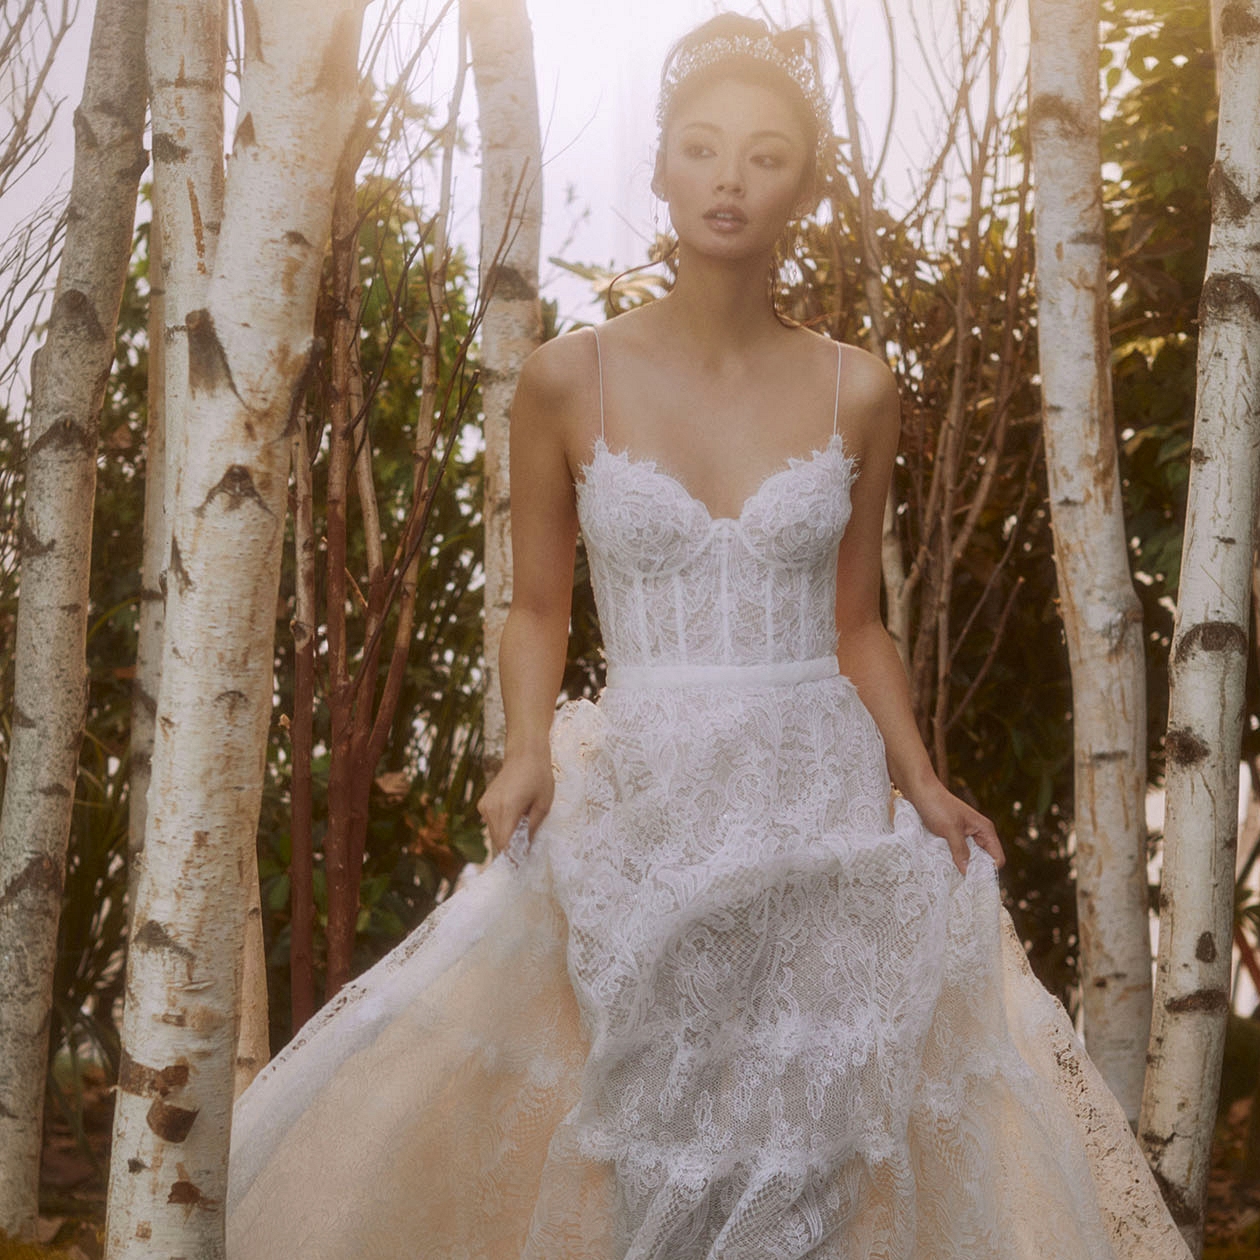 Let's Count Down the Best Wedding Dresses For 2021 From BHLDN!